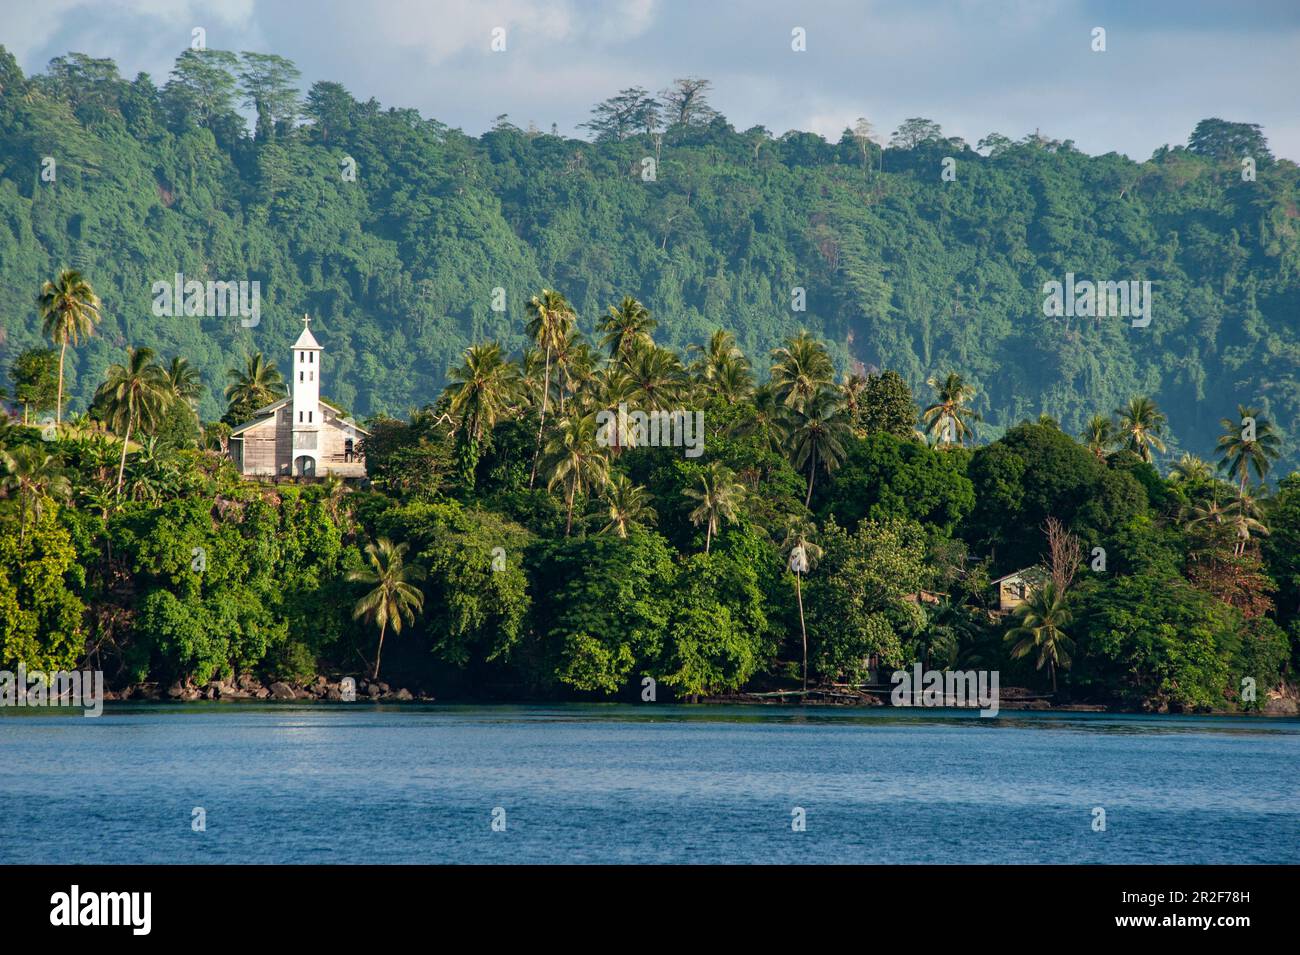 A lonely church stands on a crest surrounded by lush vegetation over the water, Garove Island, Vitu Islands, West New Britain Province, Papua New Guin Stock Photo